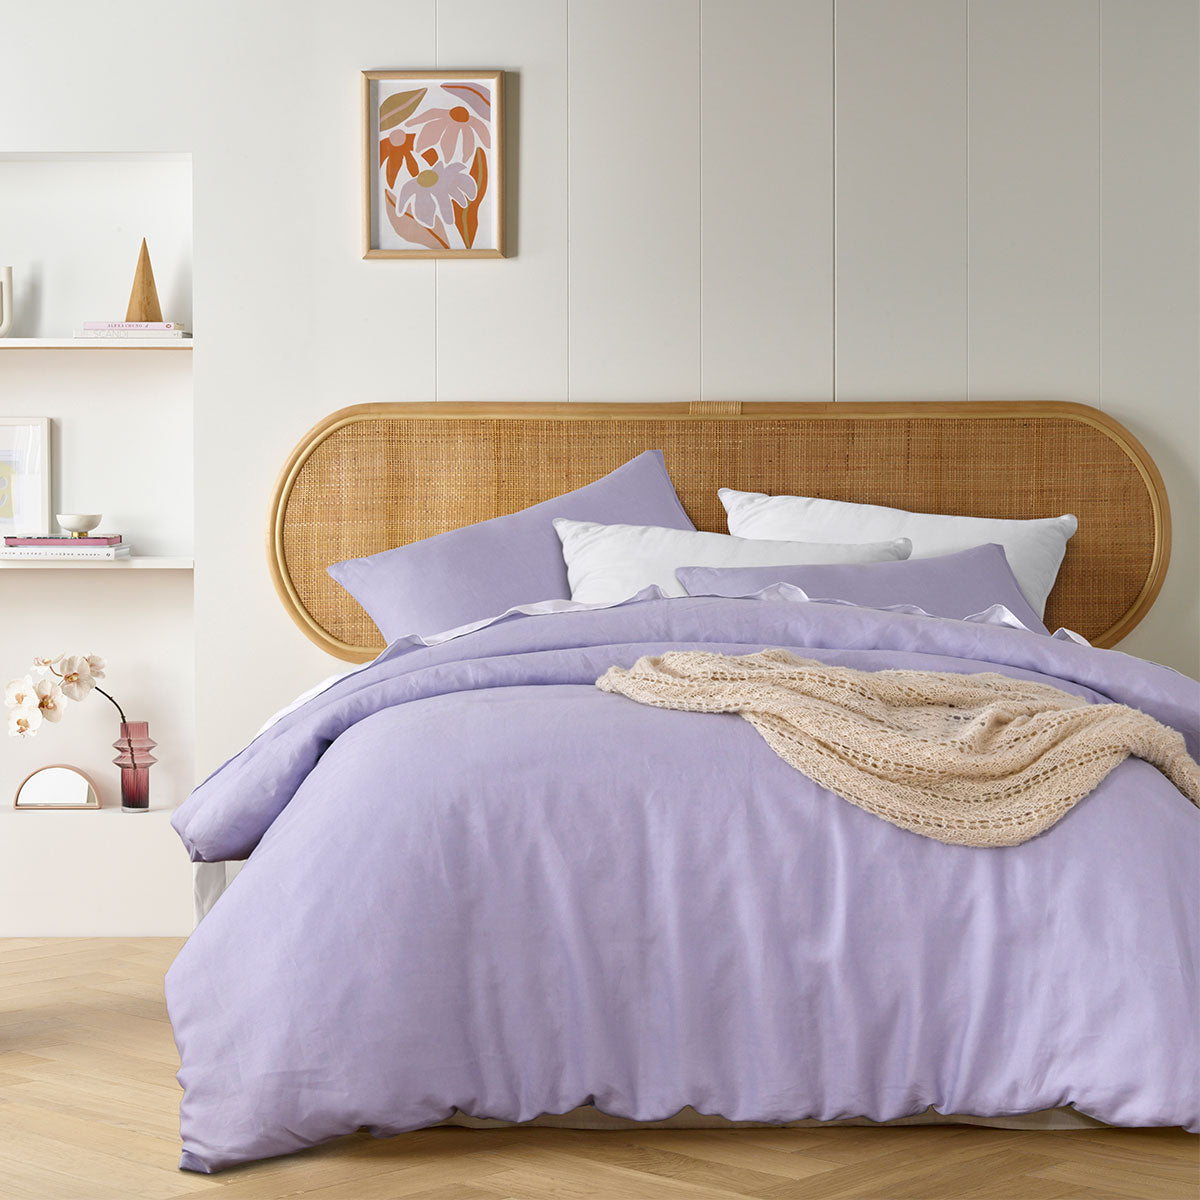 Lilac French Linen Quilt Cover Super King - A luxurious lilac quilt cover set made from premium French linen for super king-sized beds.